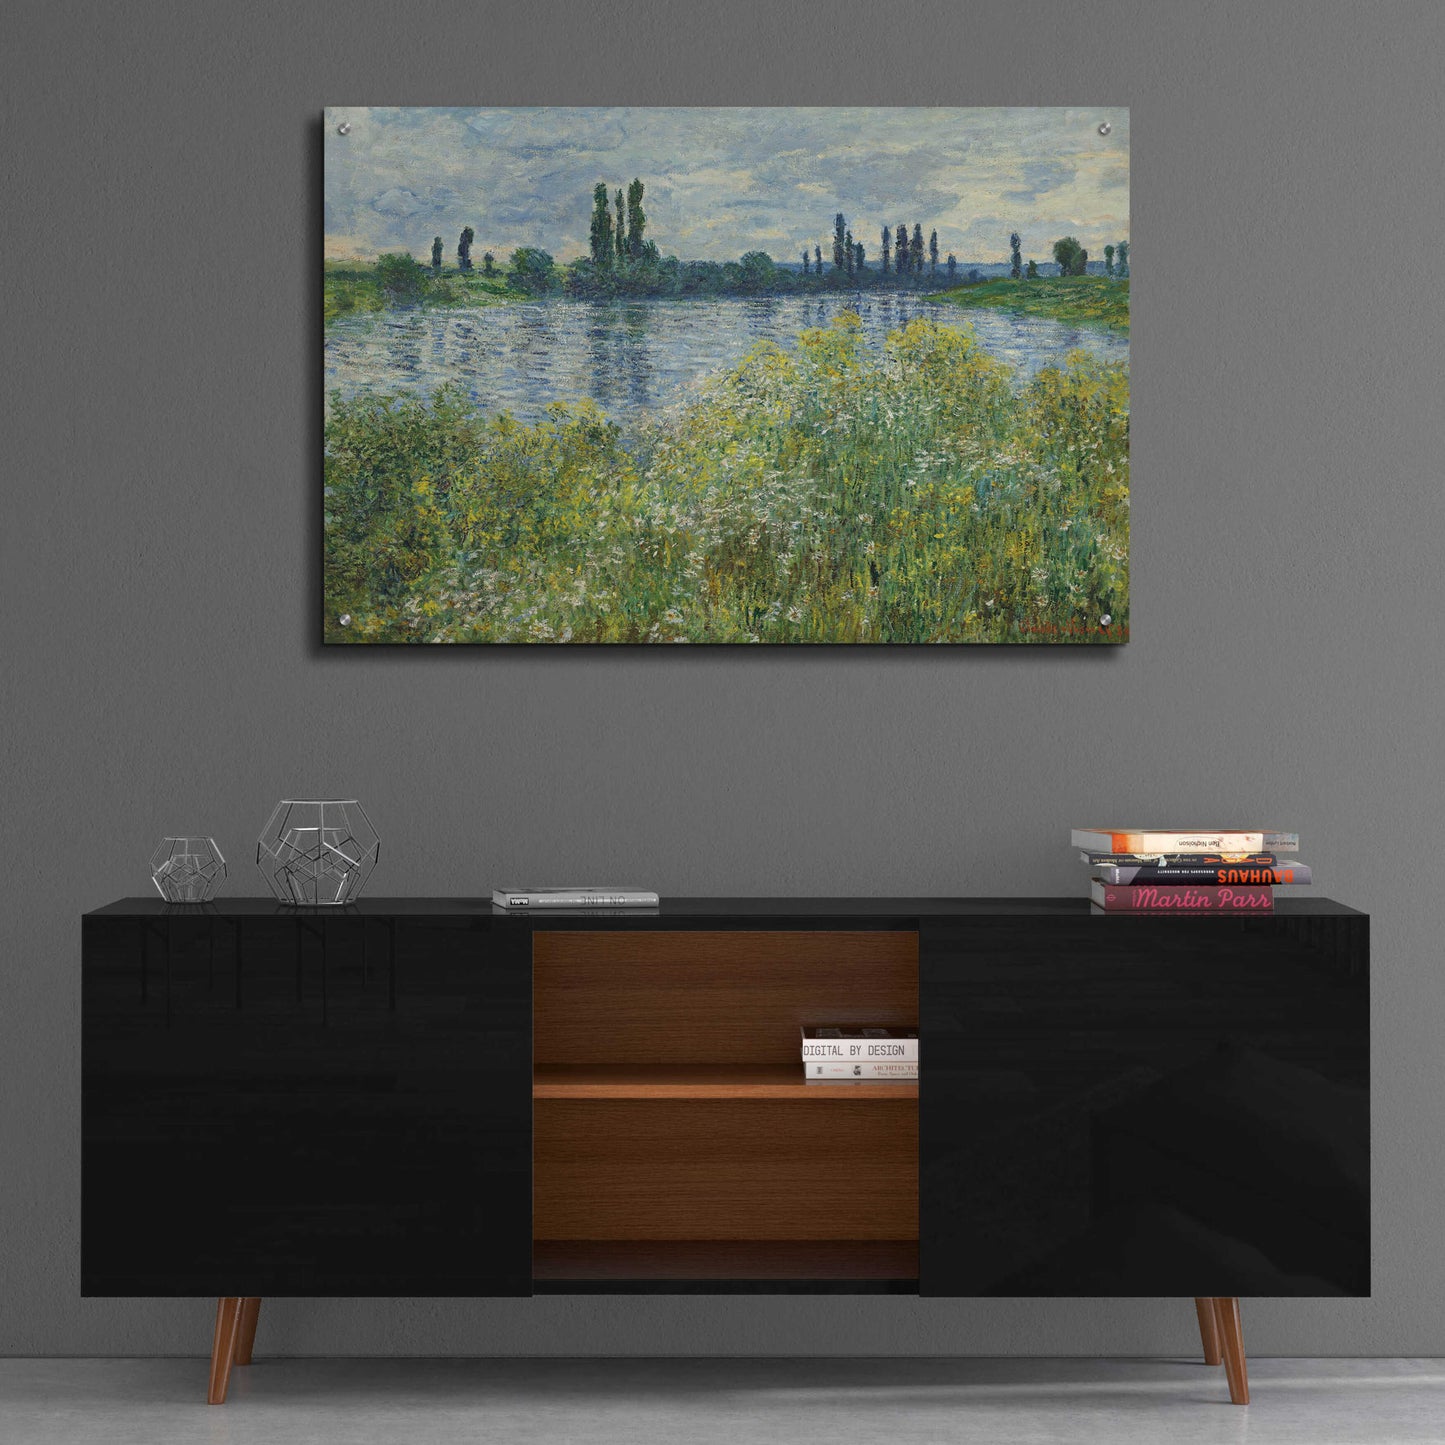 Epic Art 'Banks Od The Seine, Vetheuil' by Claude Monet, Acrylic Glass Wall Art,36x24